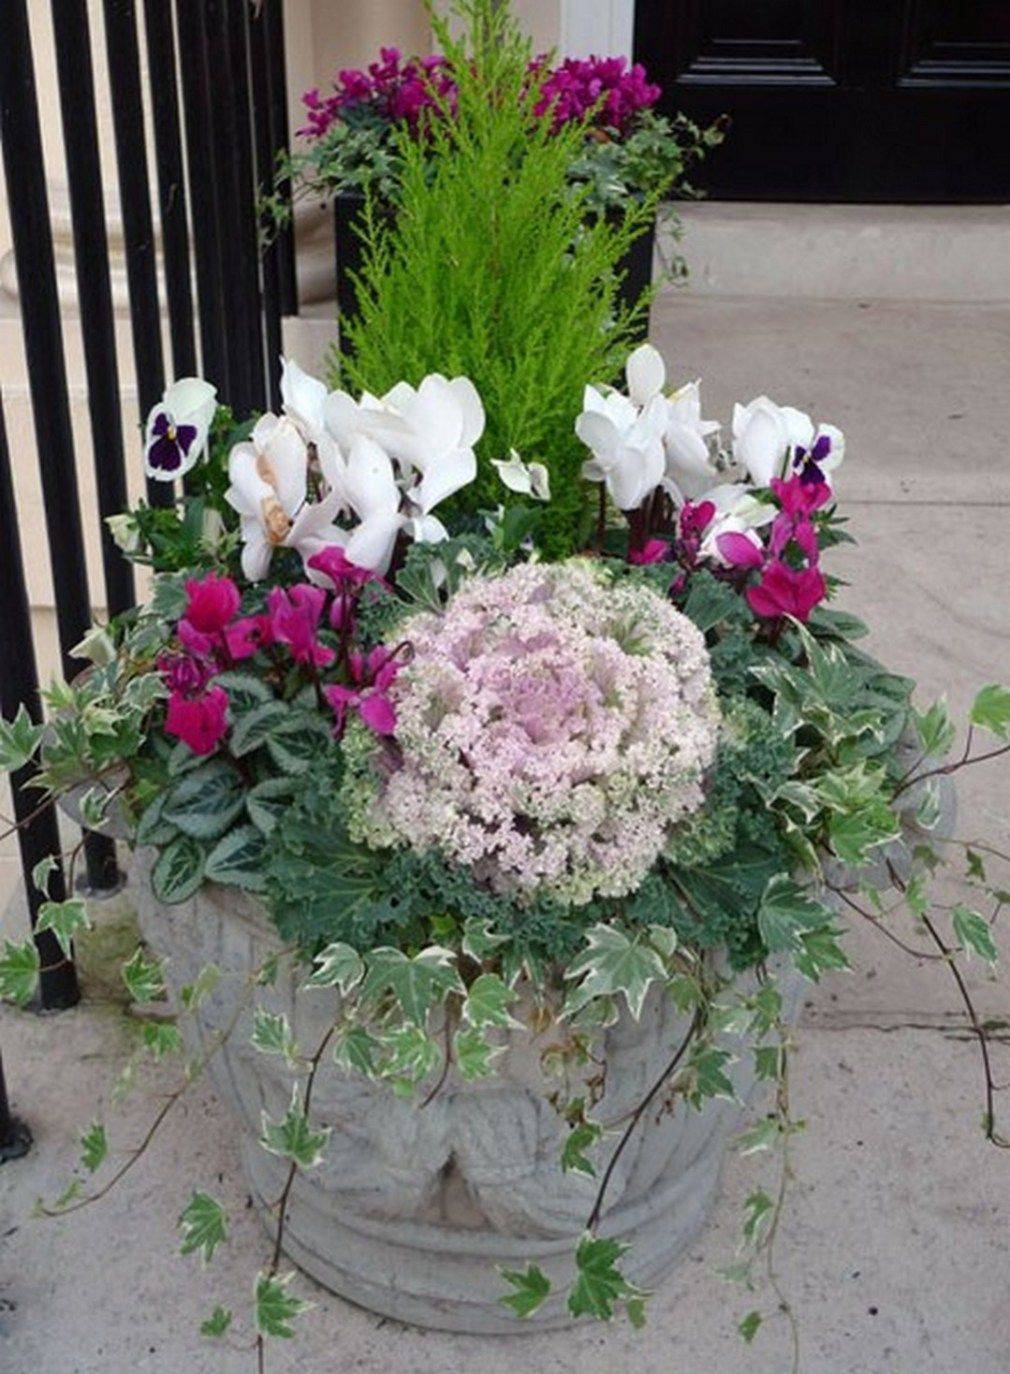 Fall Container Gardens